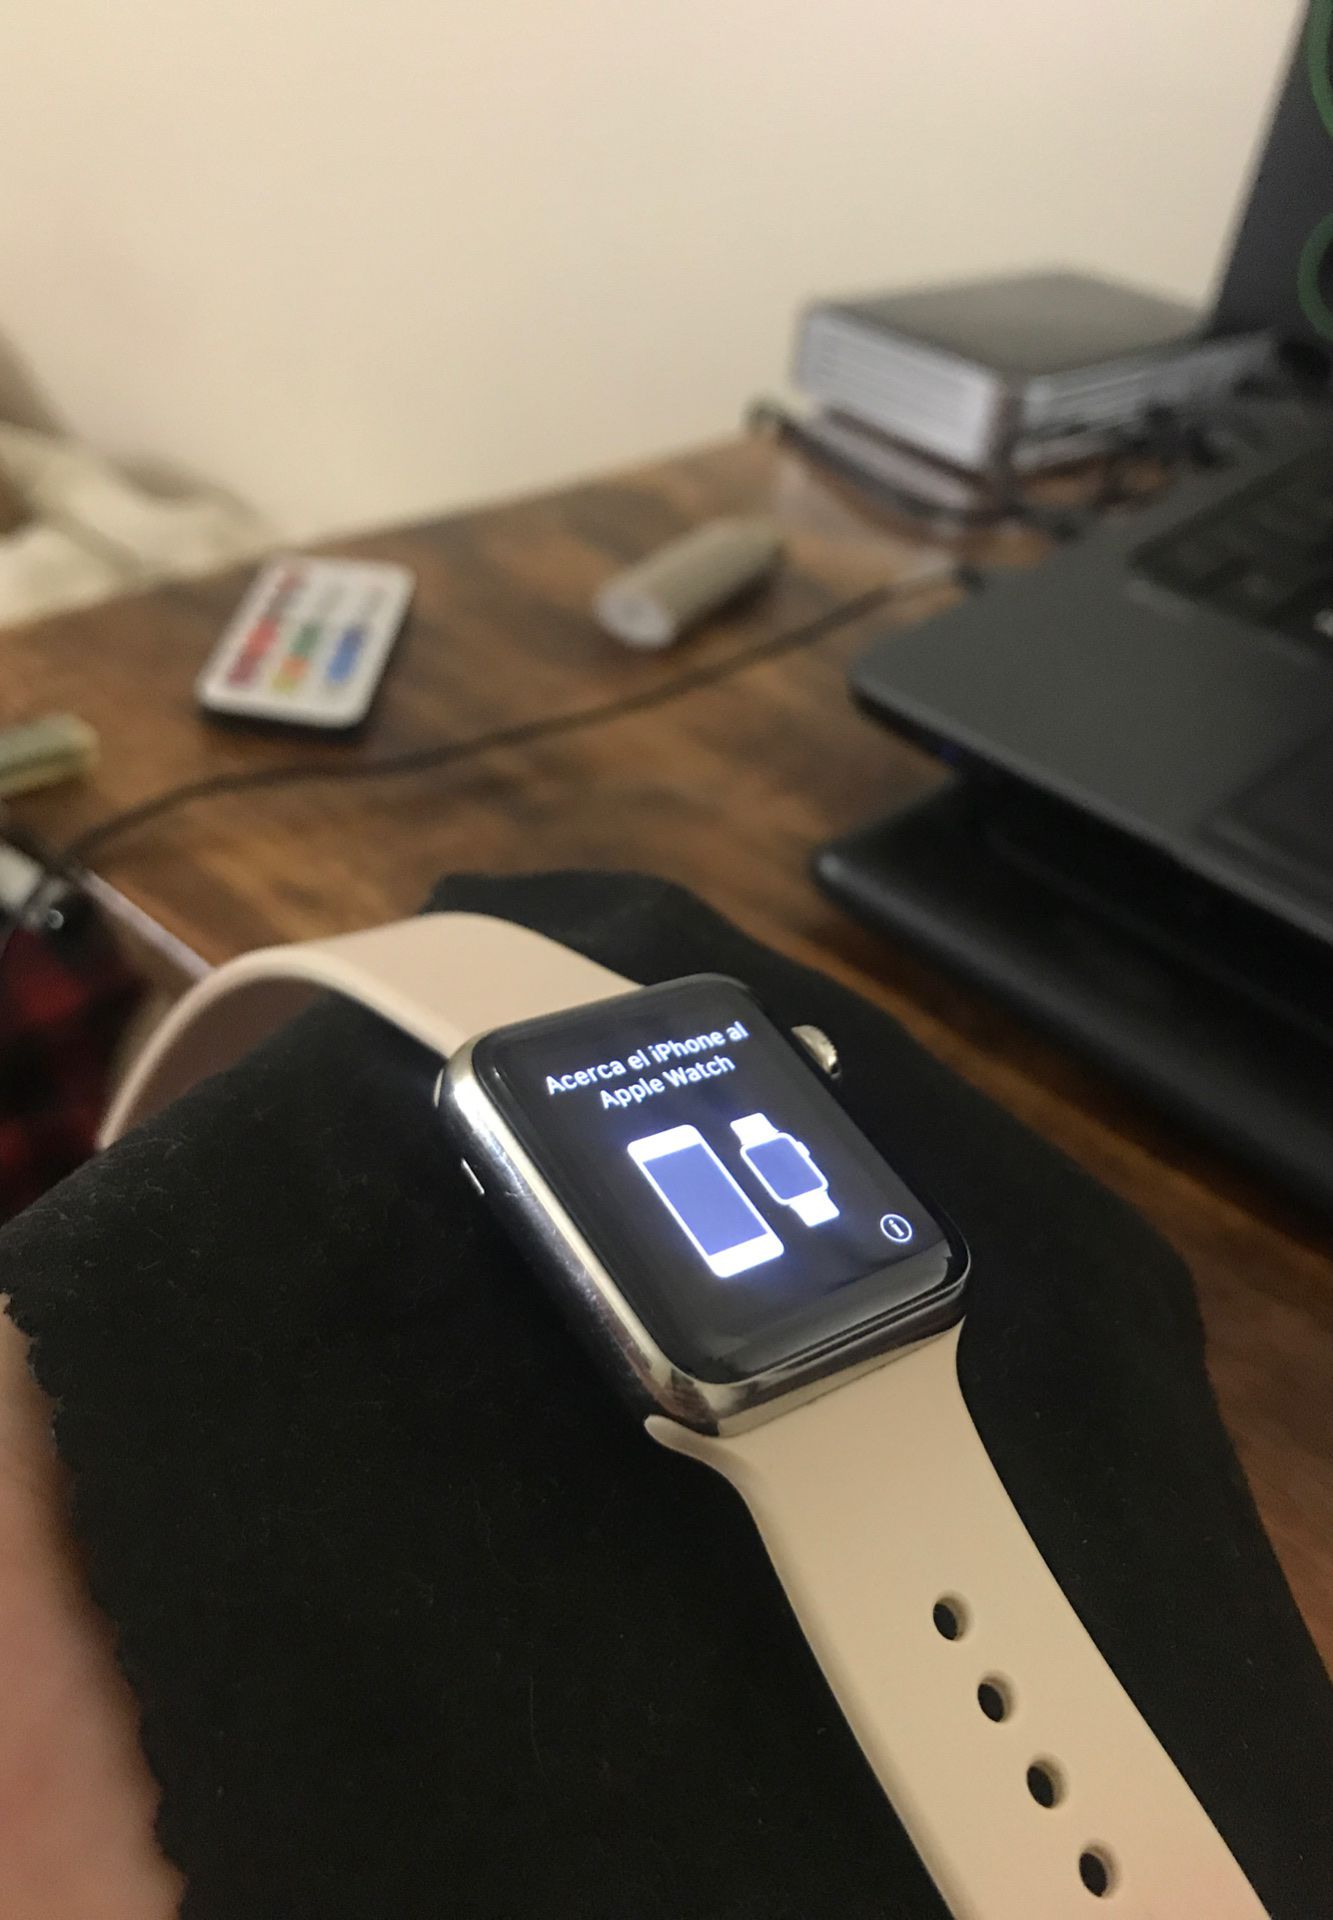 Apple Watch series 1 - no charger cable included